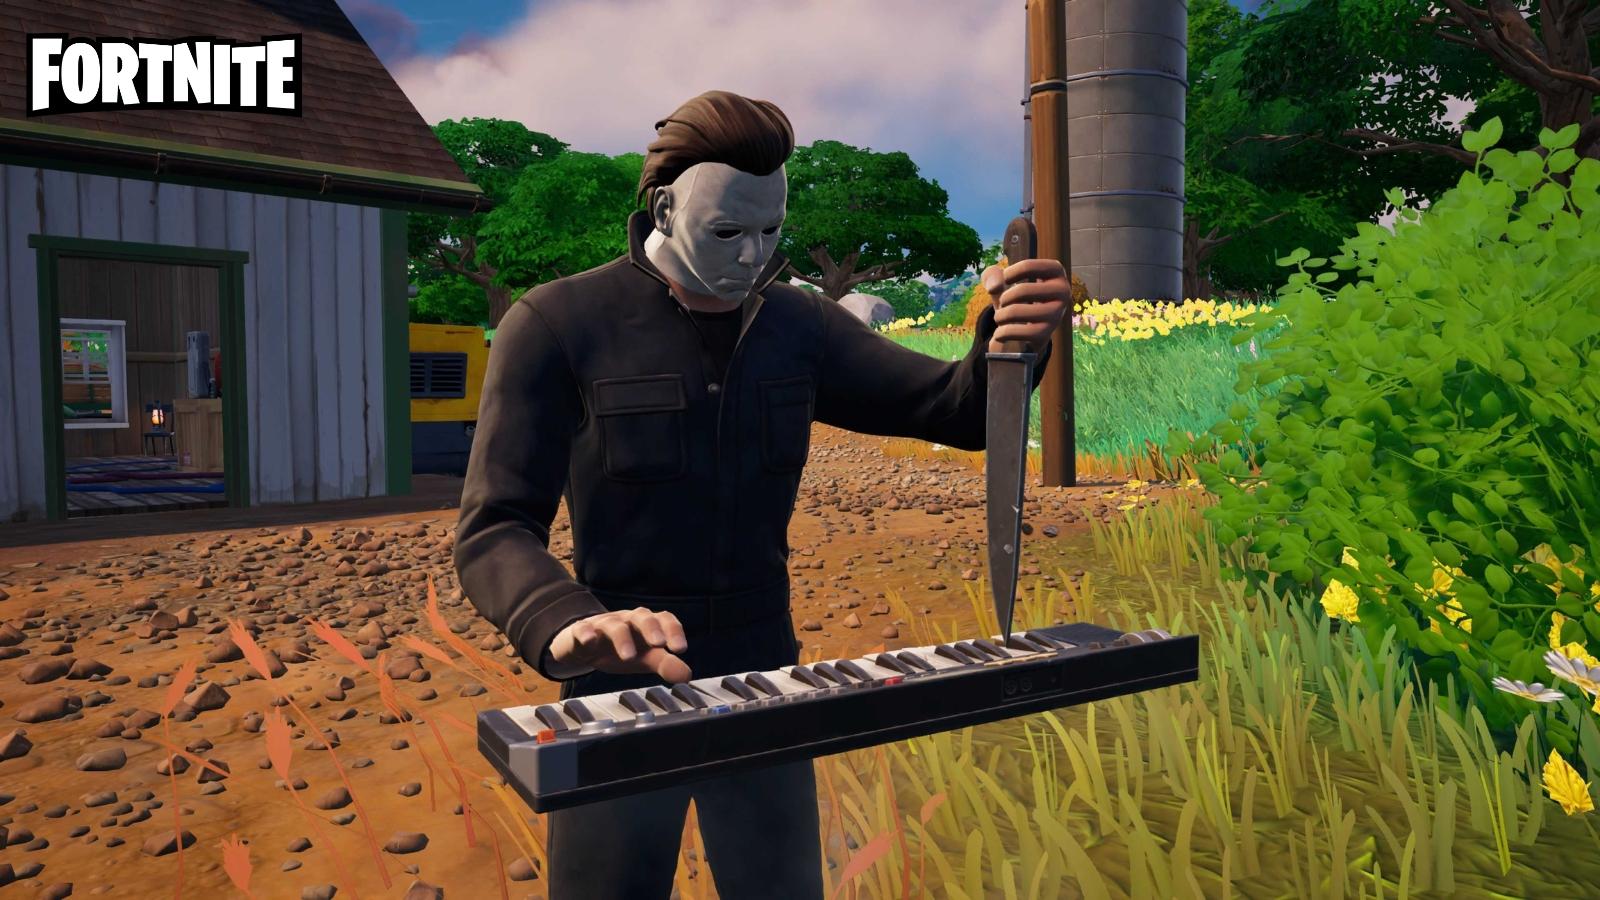 Michael Myers plays the Halloween theme in Fortnite